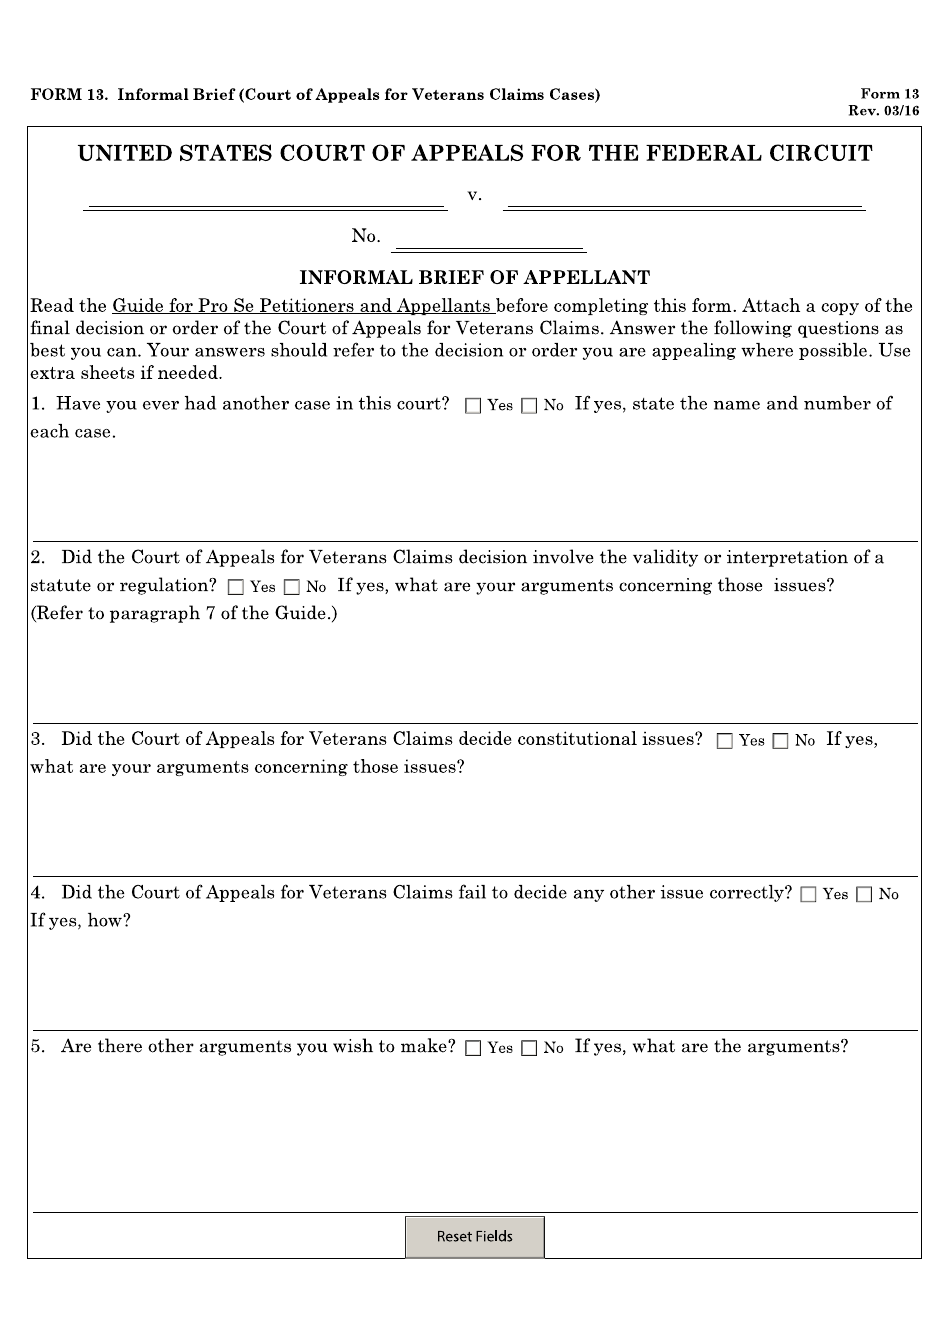 Form 13 Informal Brief (Court of Appeals for Veterans Claims Cases), Page 1